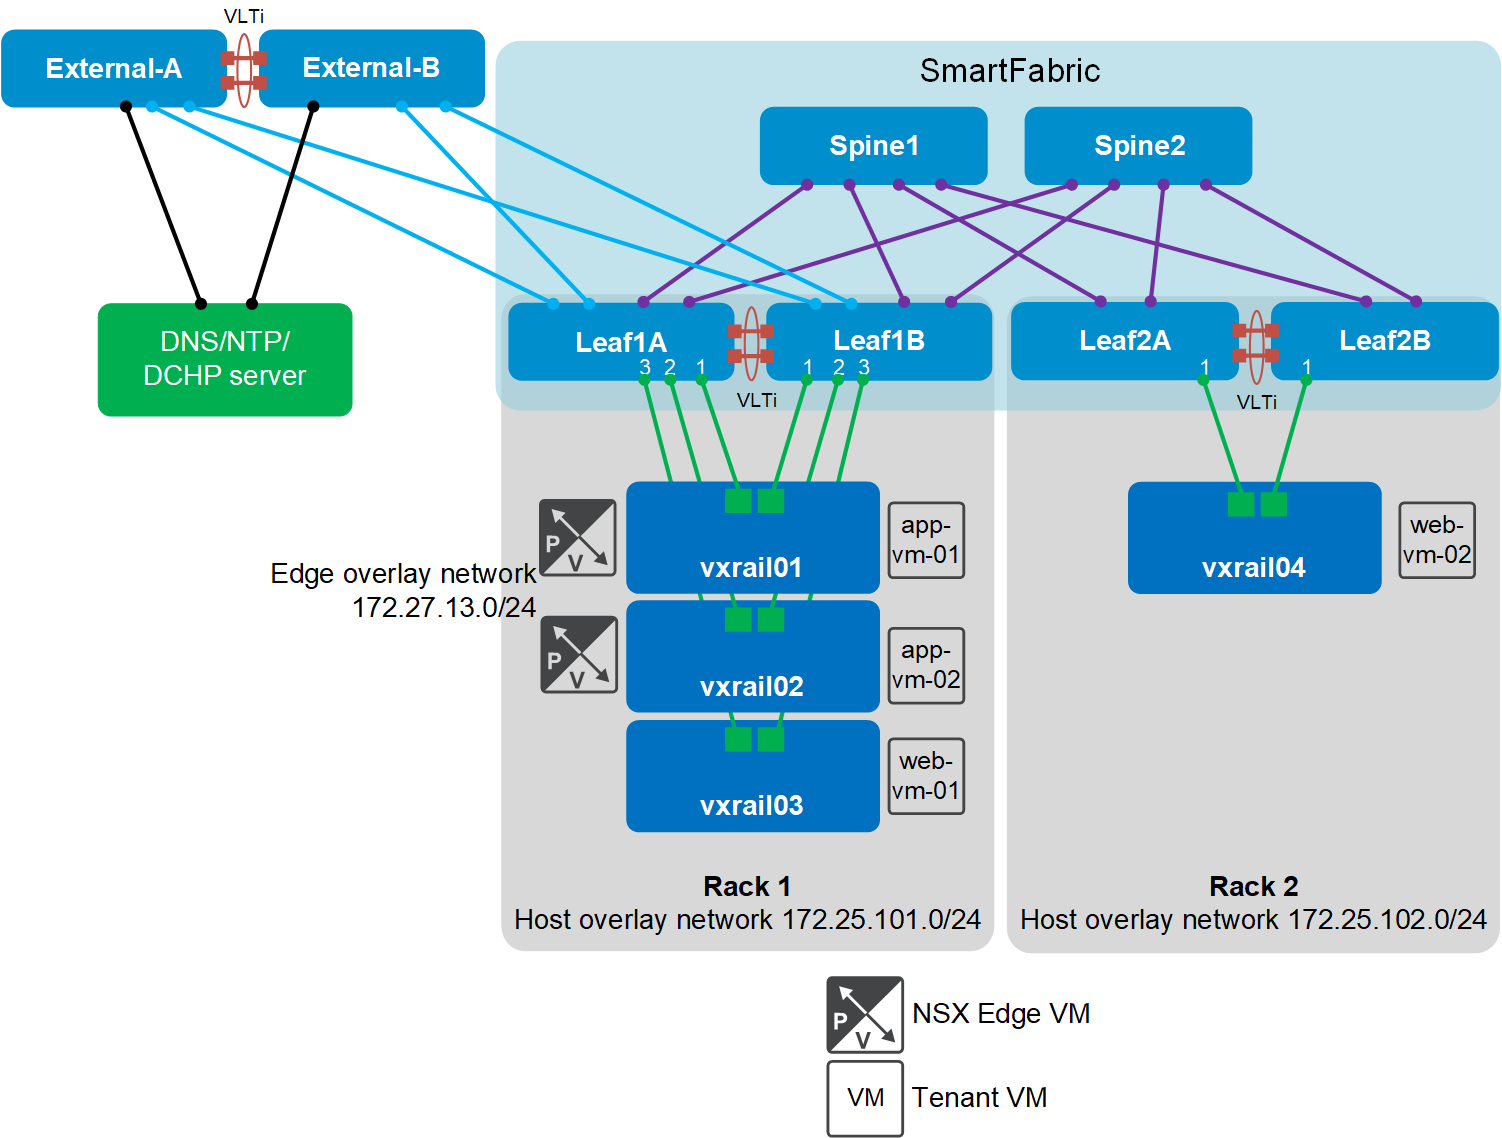 Tenant VM and VxRail node locations and overlay network TEP addresses